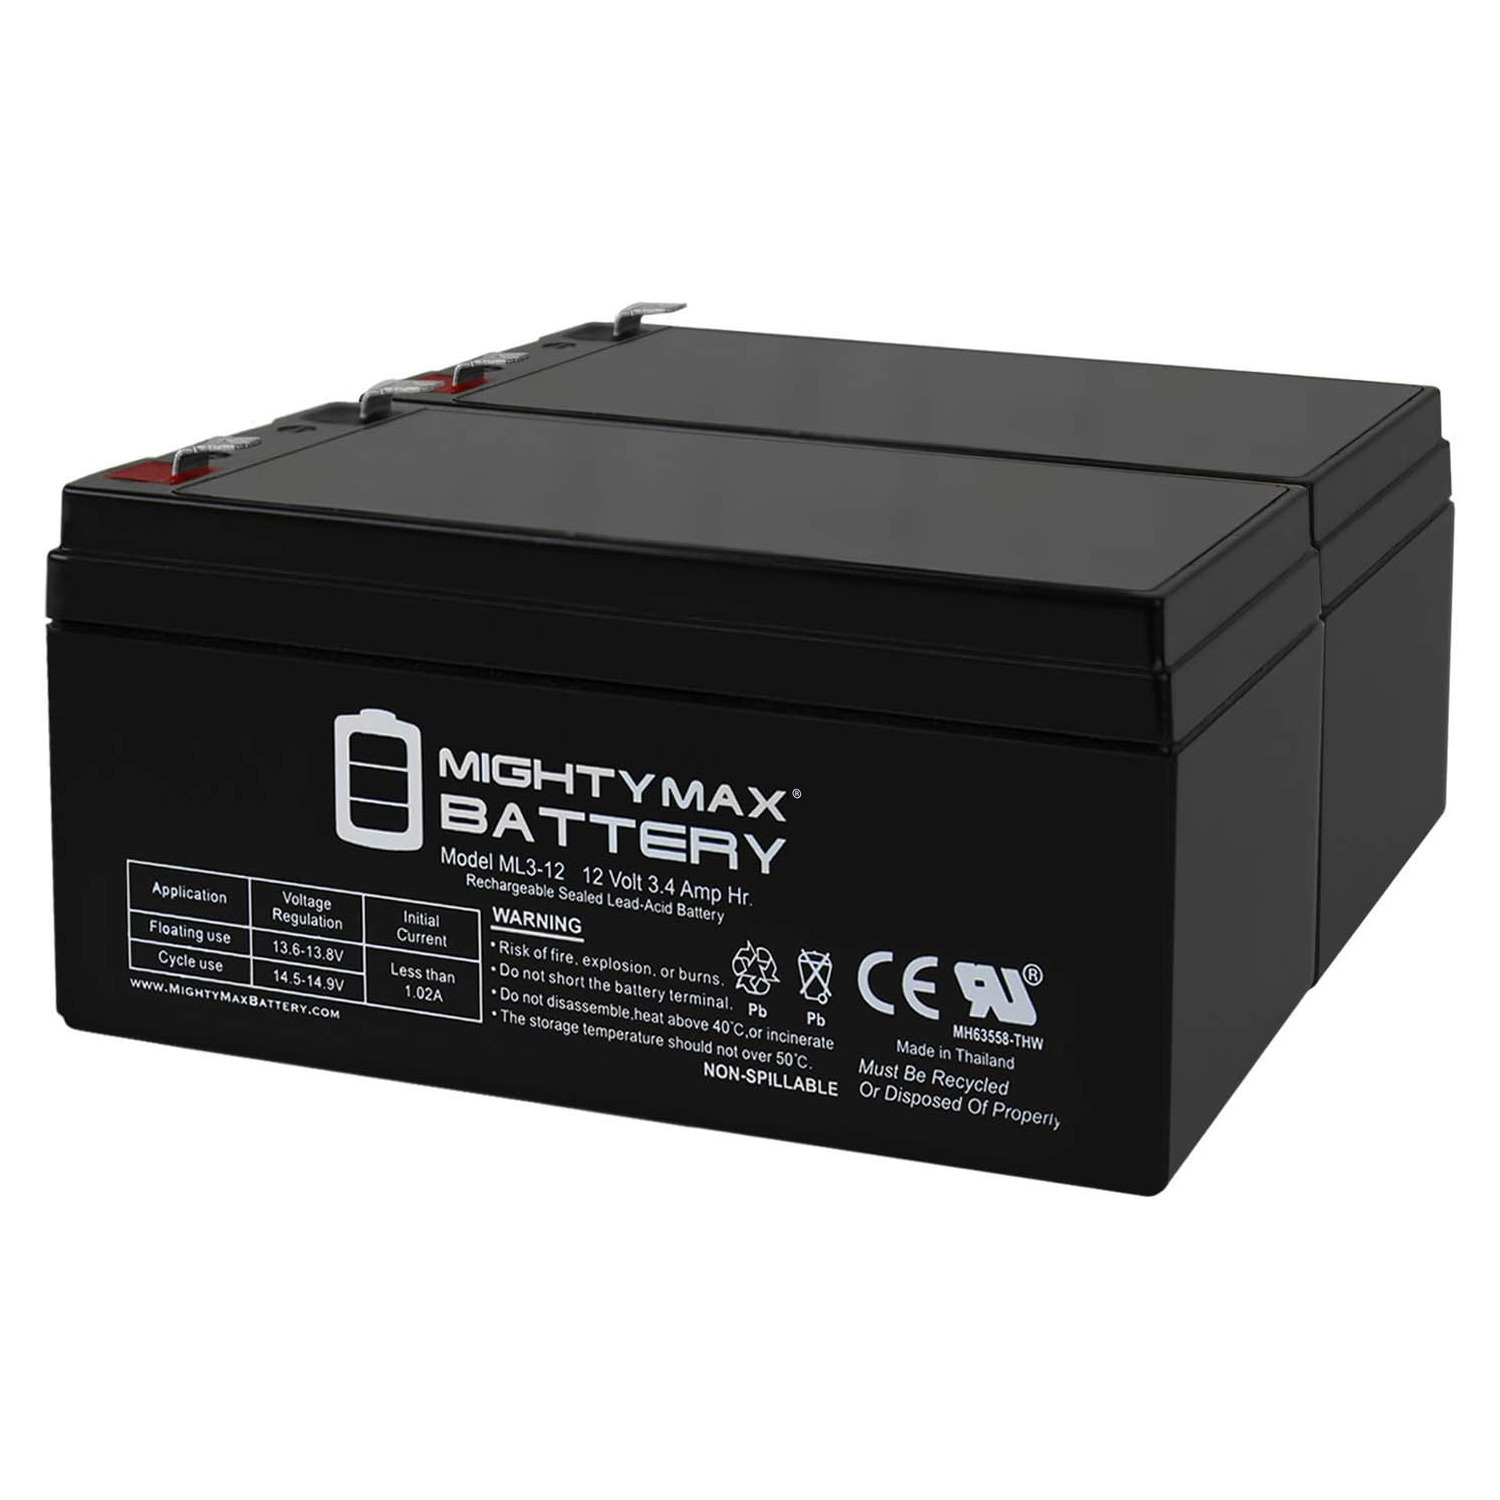 12V 3AH SLA Replacement Battery for GS Portalac PE12V3F1 - 2 Pack